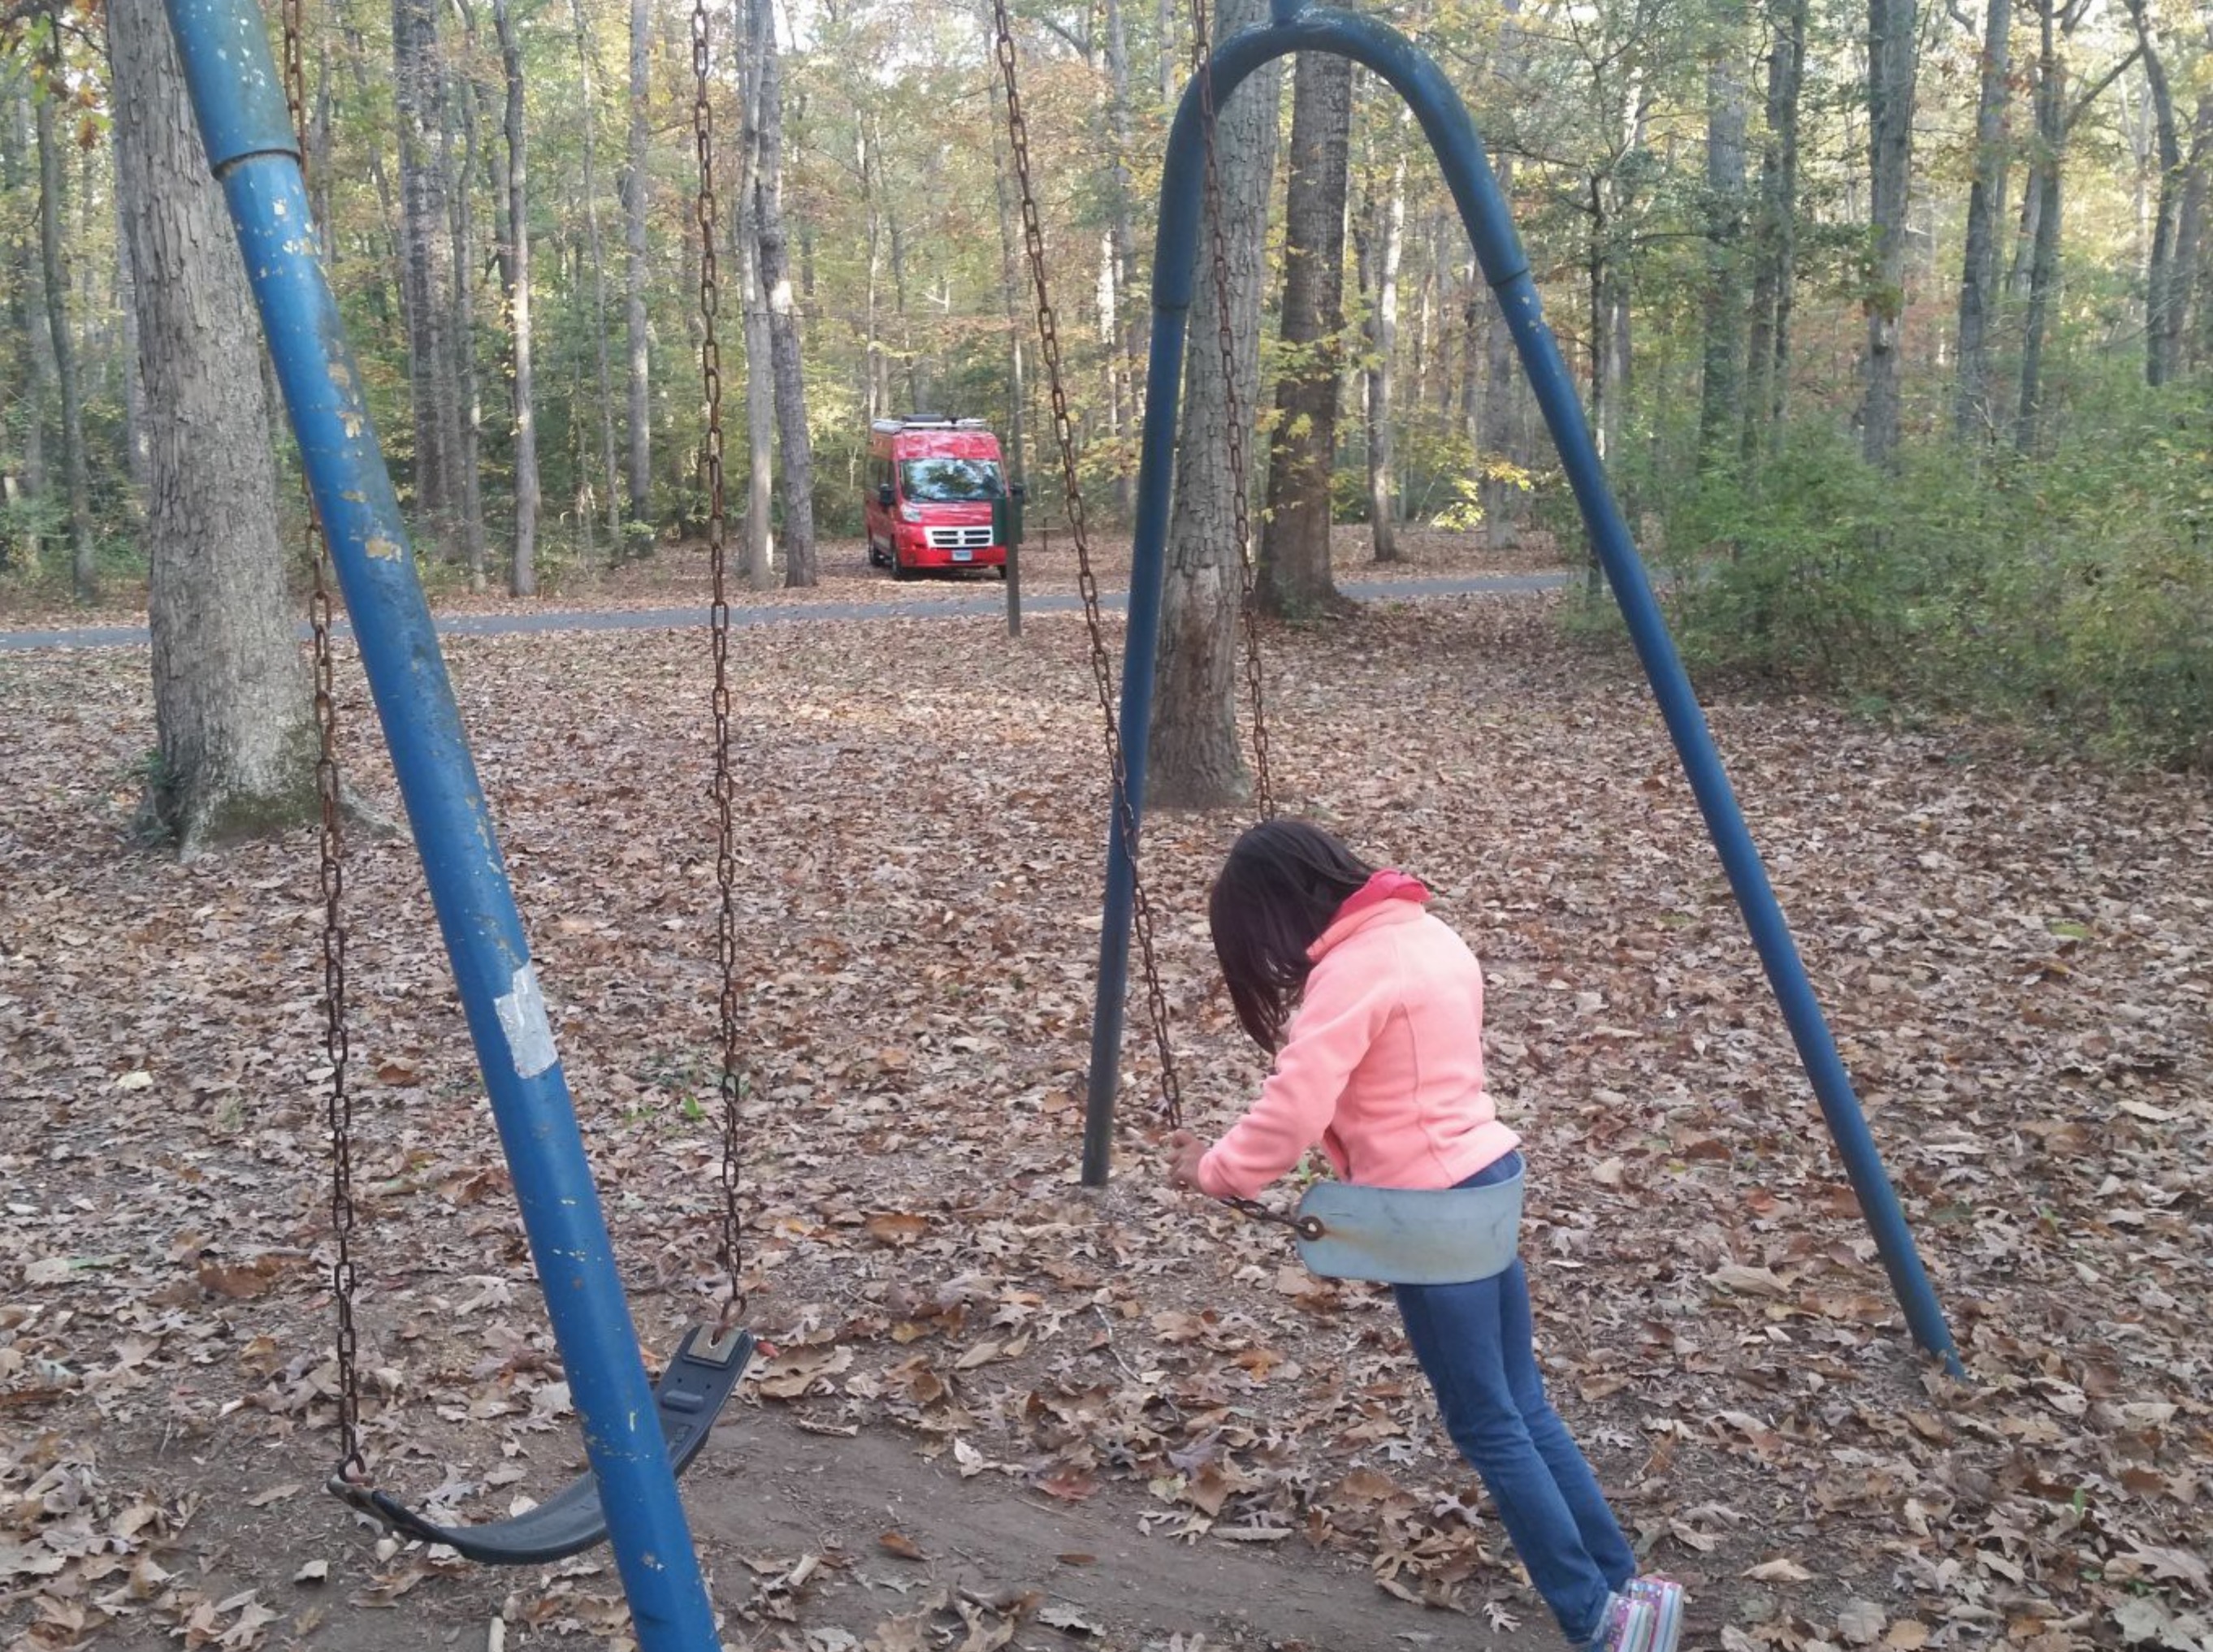 Girl on a swing set with red Winnebago Travato parked in the background.